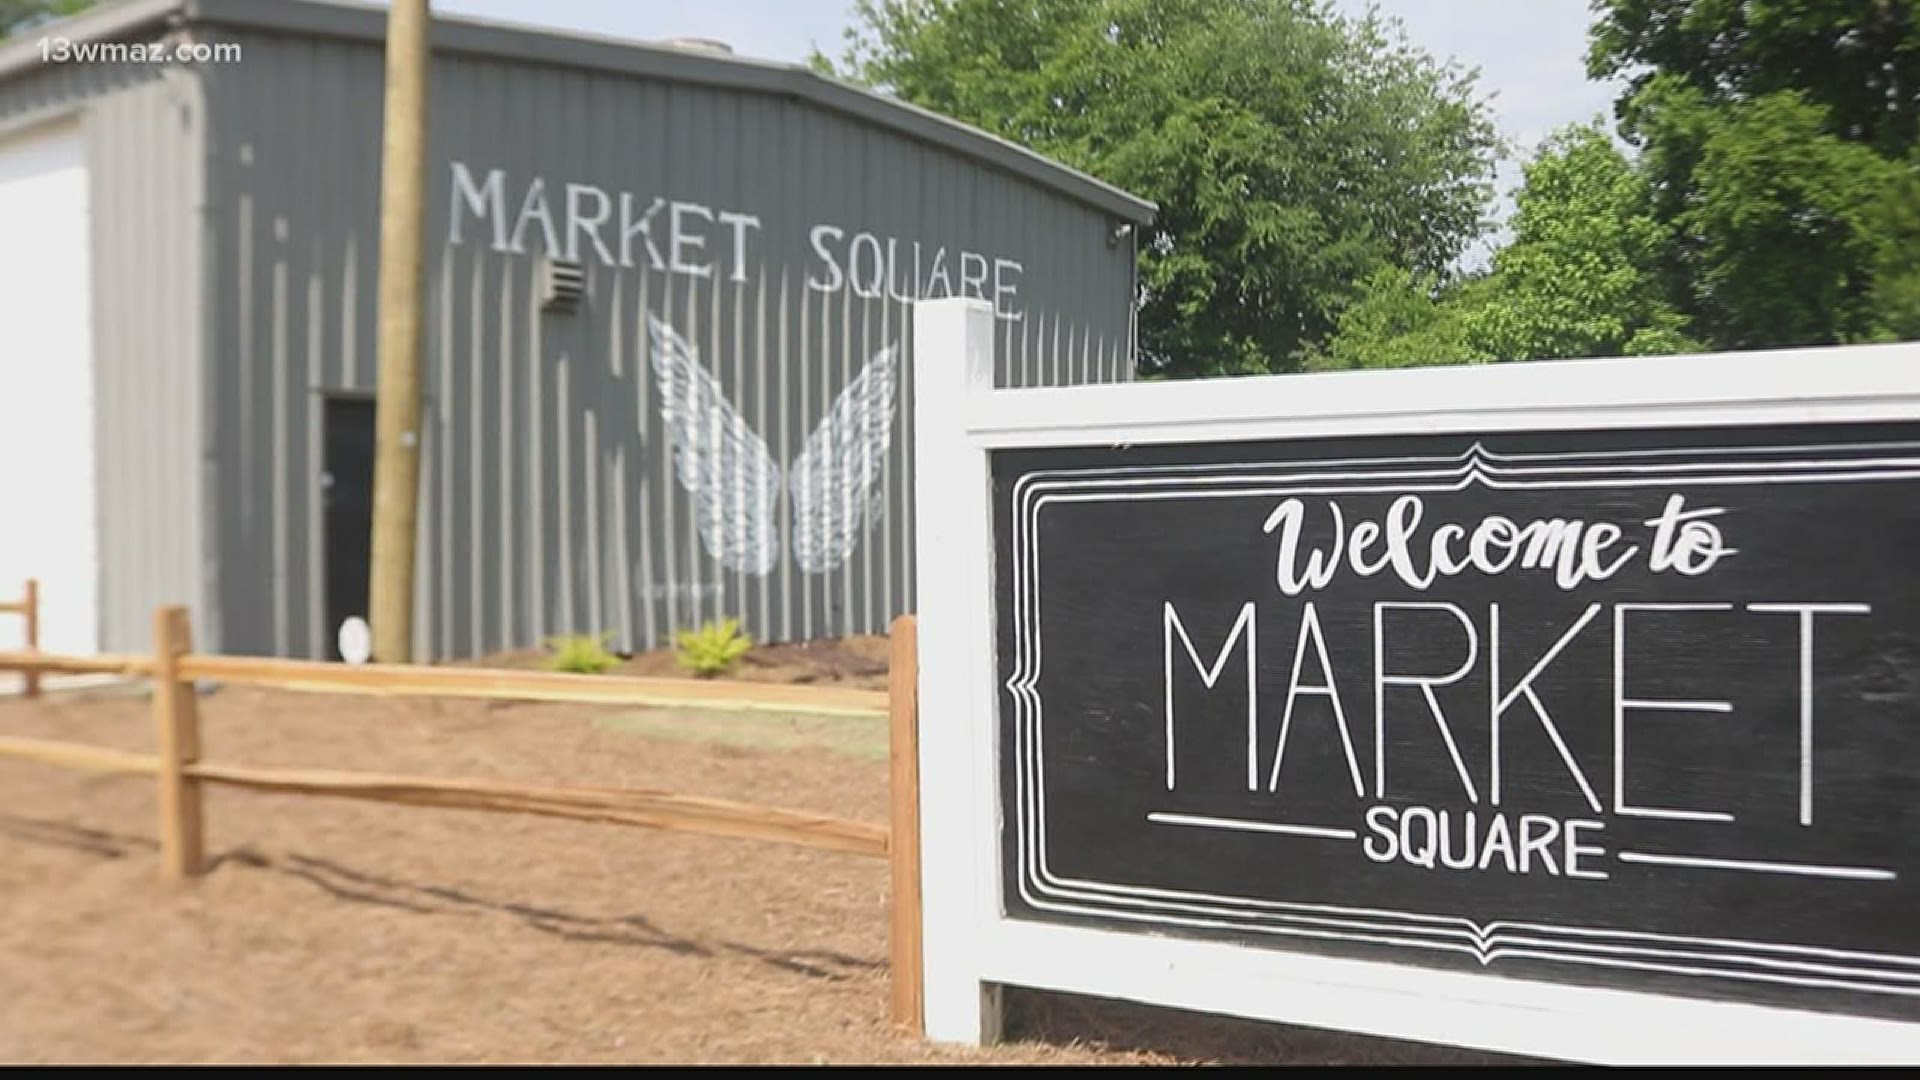 Market Square North Macon will sell fresh fruits and vegetables, in addition to homemade ice cream.